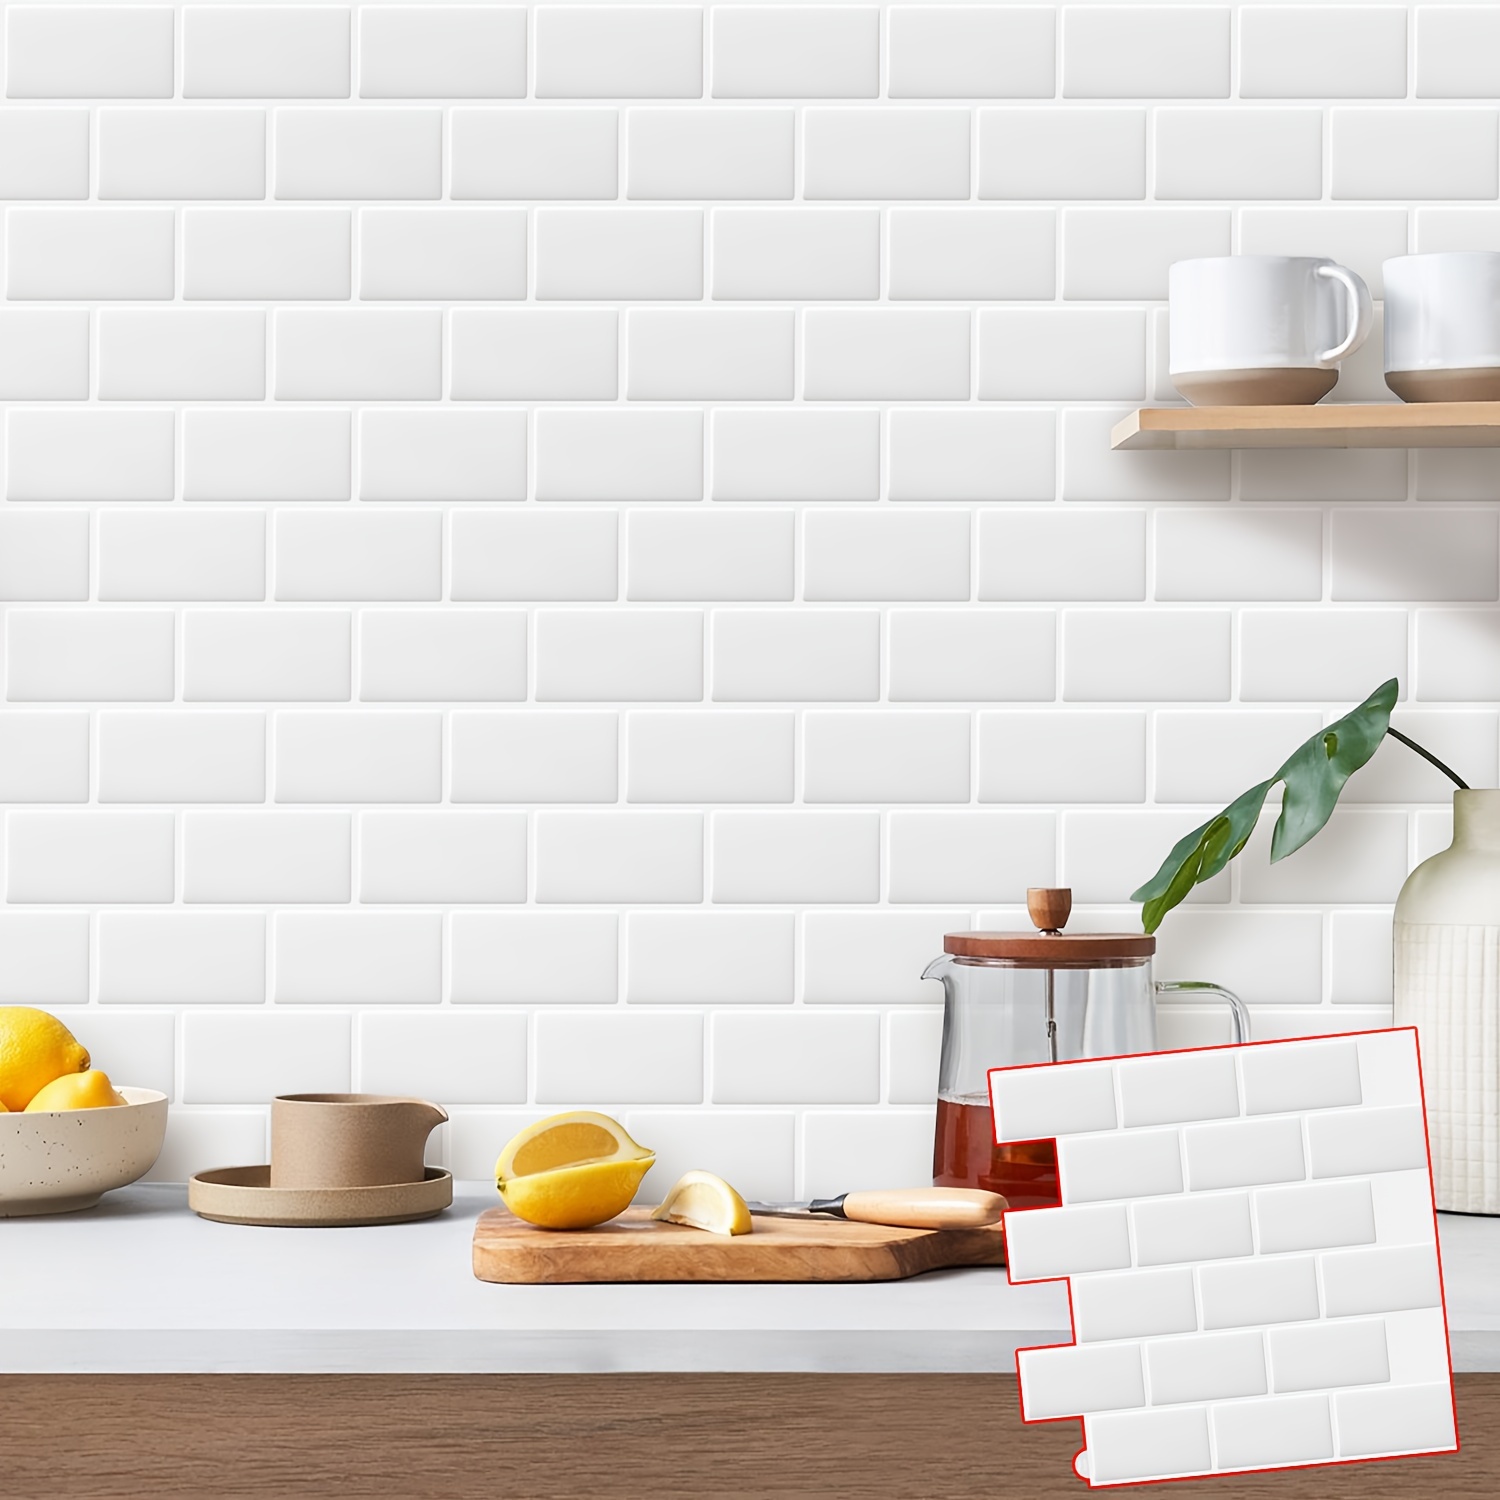 

10 Sheets Peel And Stick Tile For Kitchen Backsplash, 12x12 Inches Off Grey White Tile With White Grout Easy To Install Wall Accents, Bathroom, Counter Top